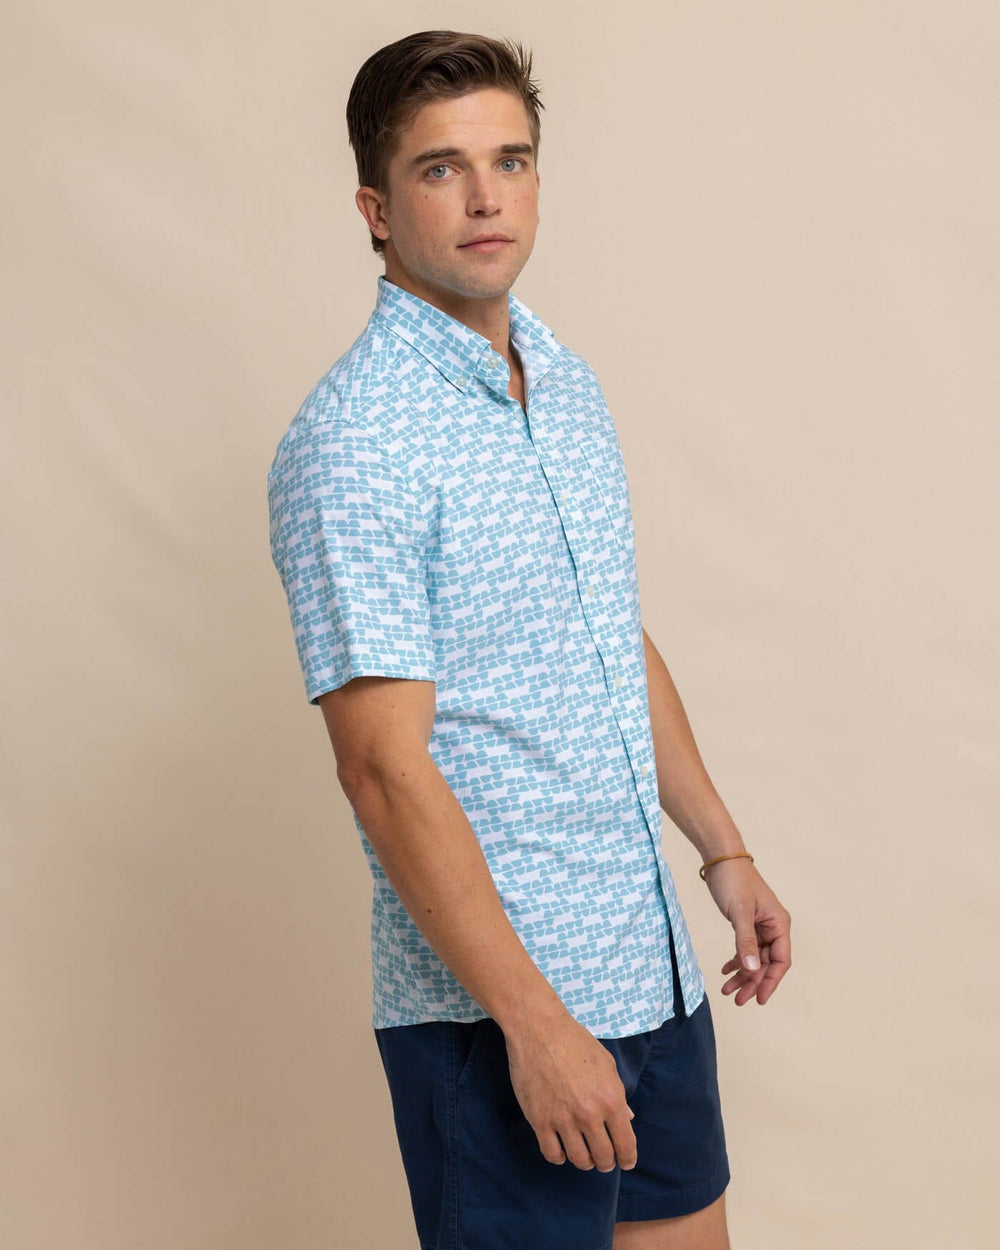 The front view of the Southern Tide brrr Intercoastal Heather Stay Shady Short Sleeve Sport Shirt by Southern Tide - Heather Wake Blue